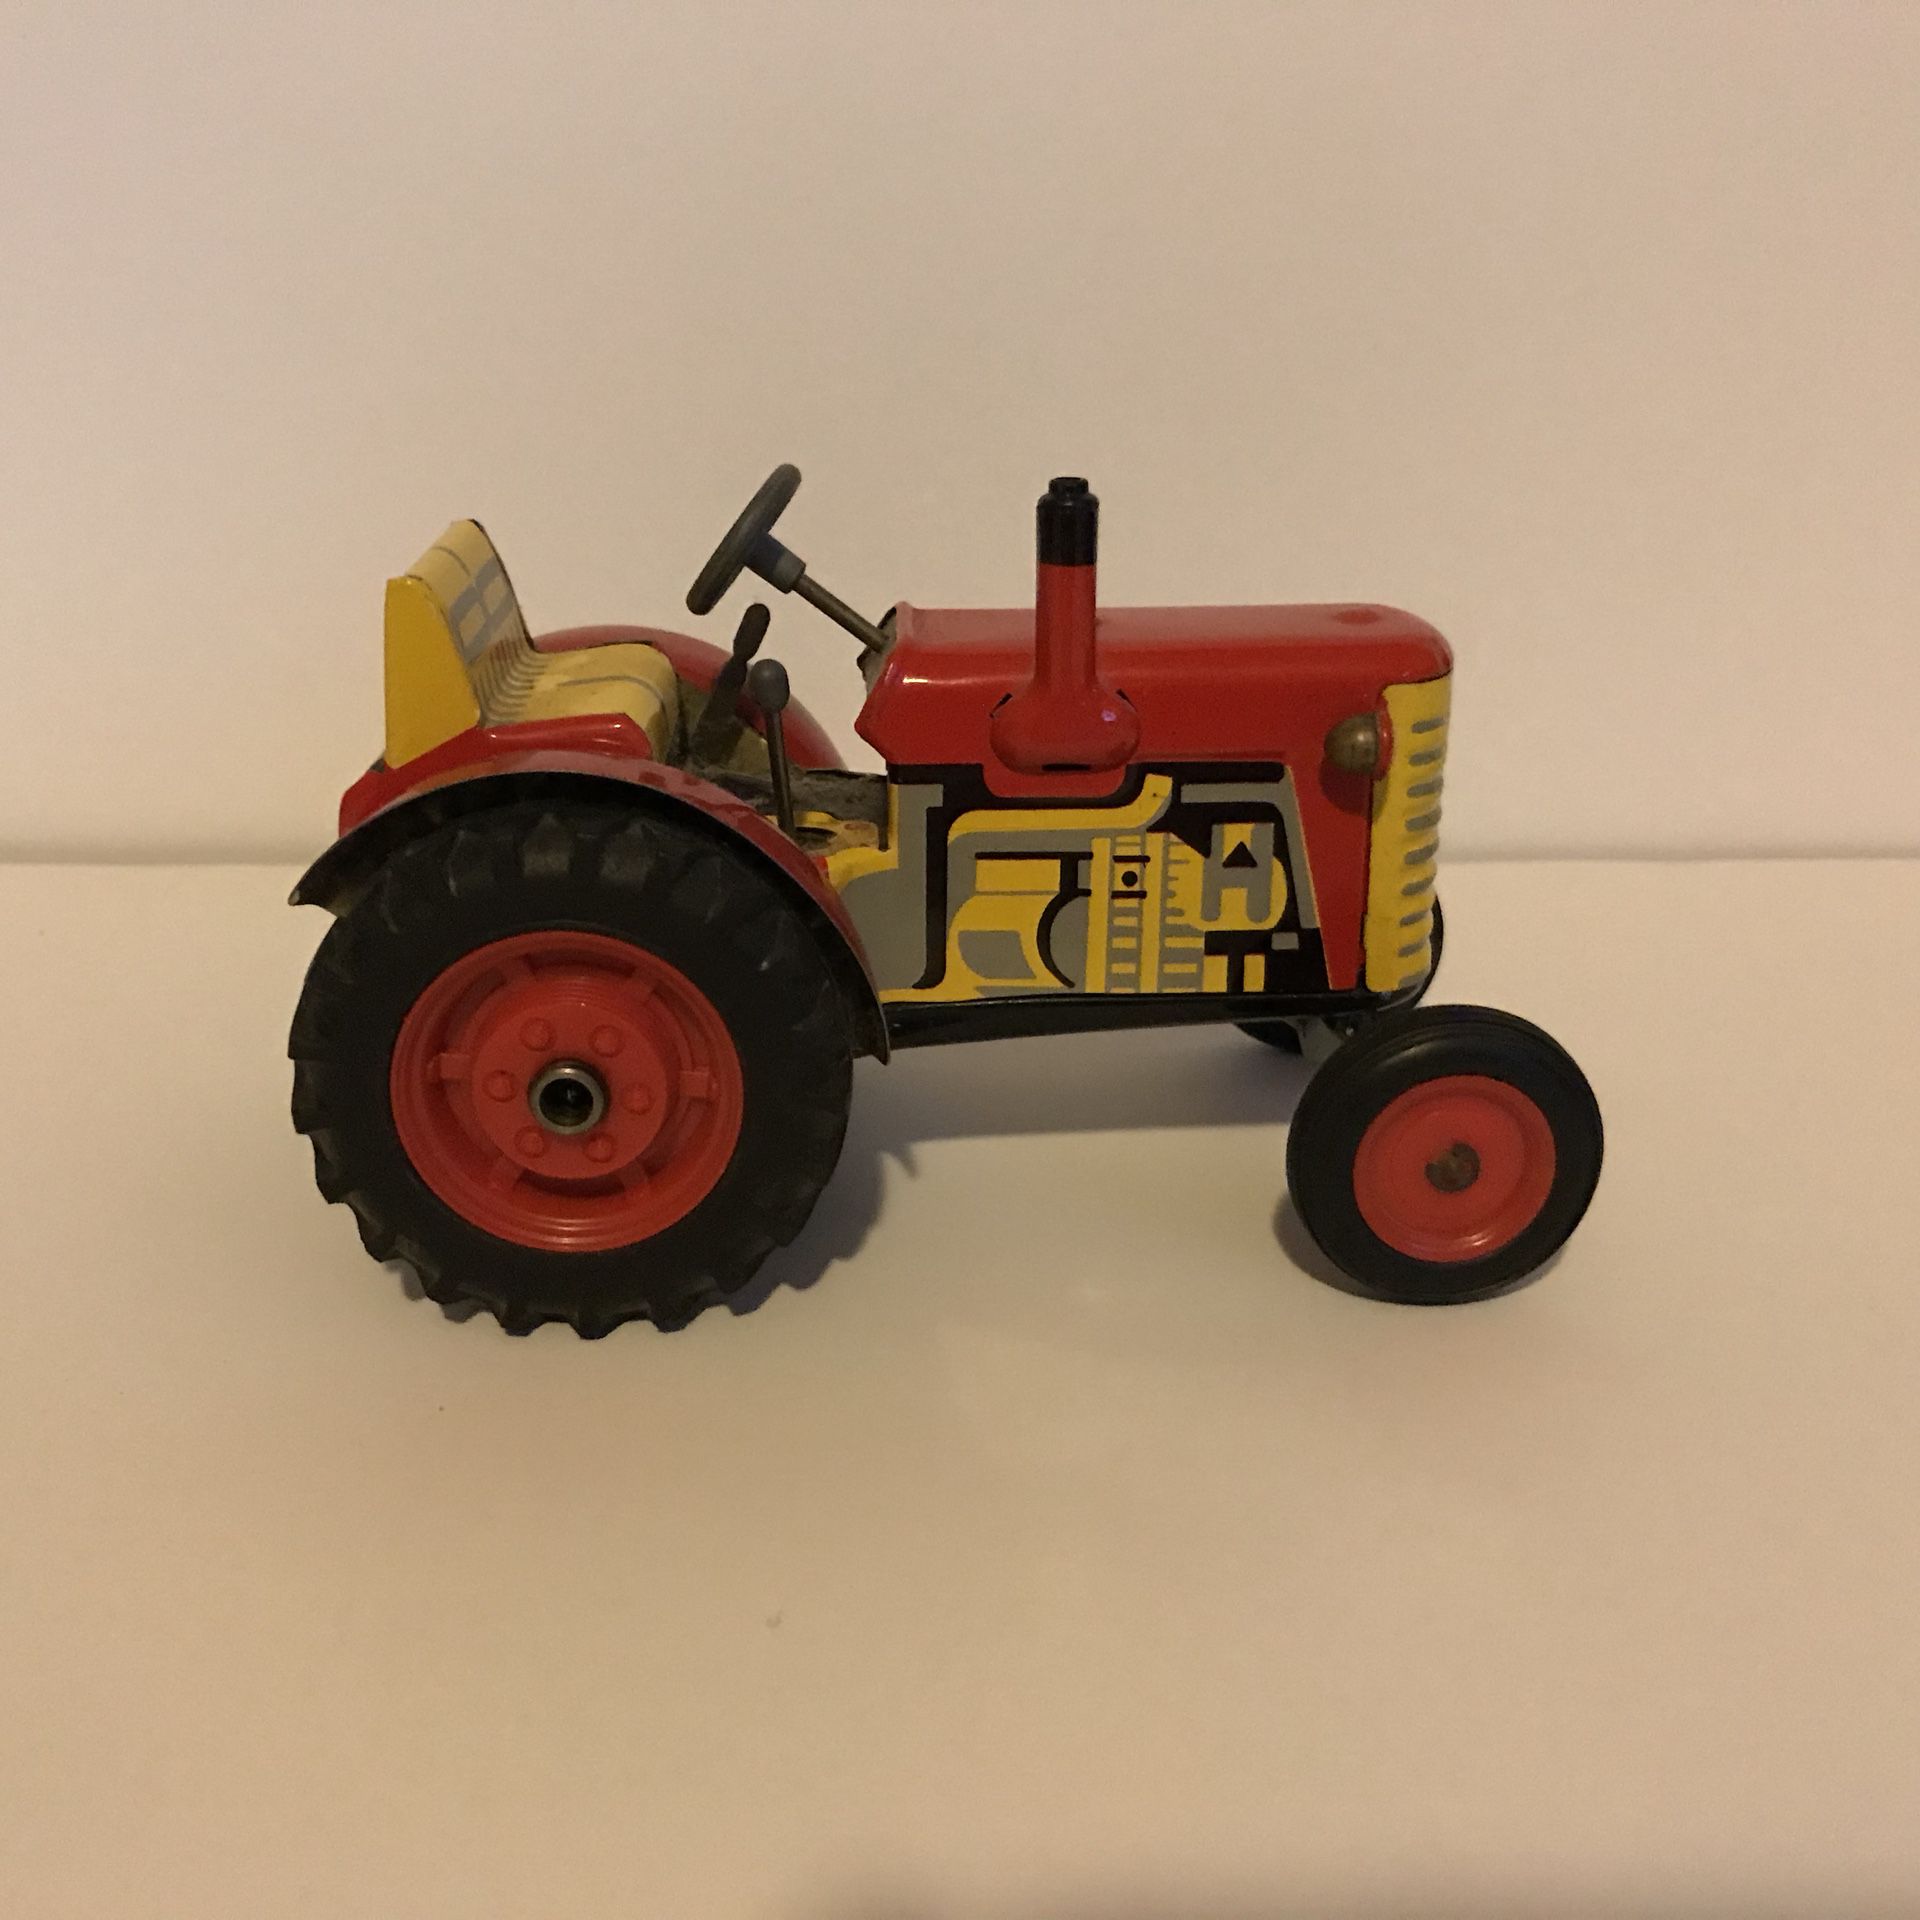 VINTAGE ZETOR TIN TOY TRACTOR! VERY COLLECTIBLE! PRICED TO SELL!